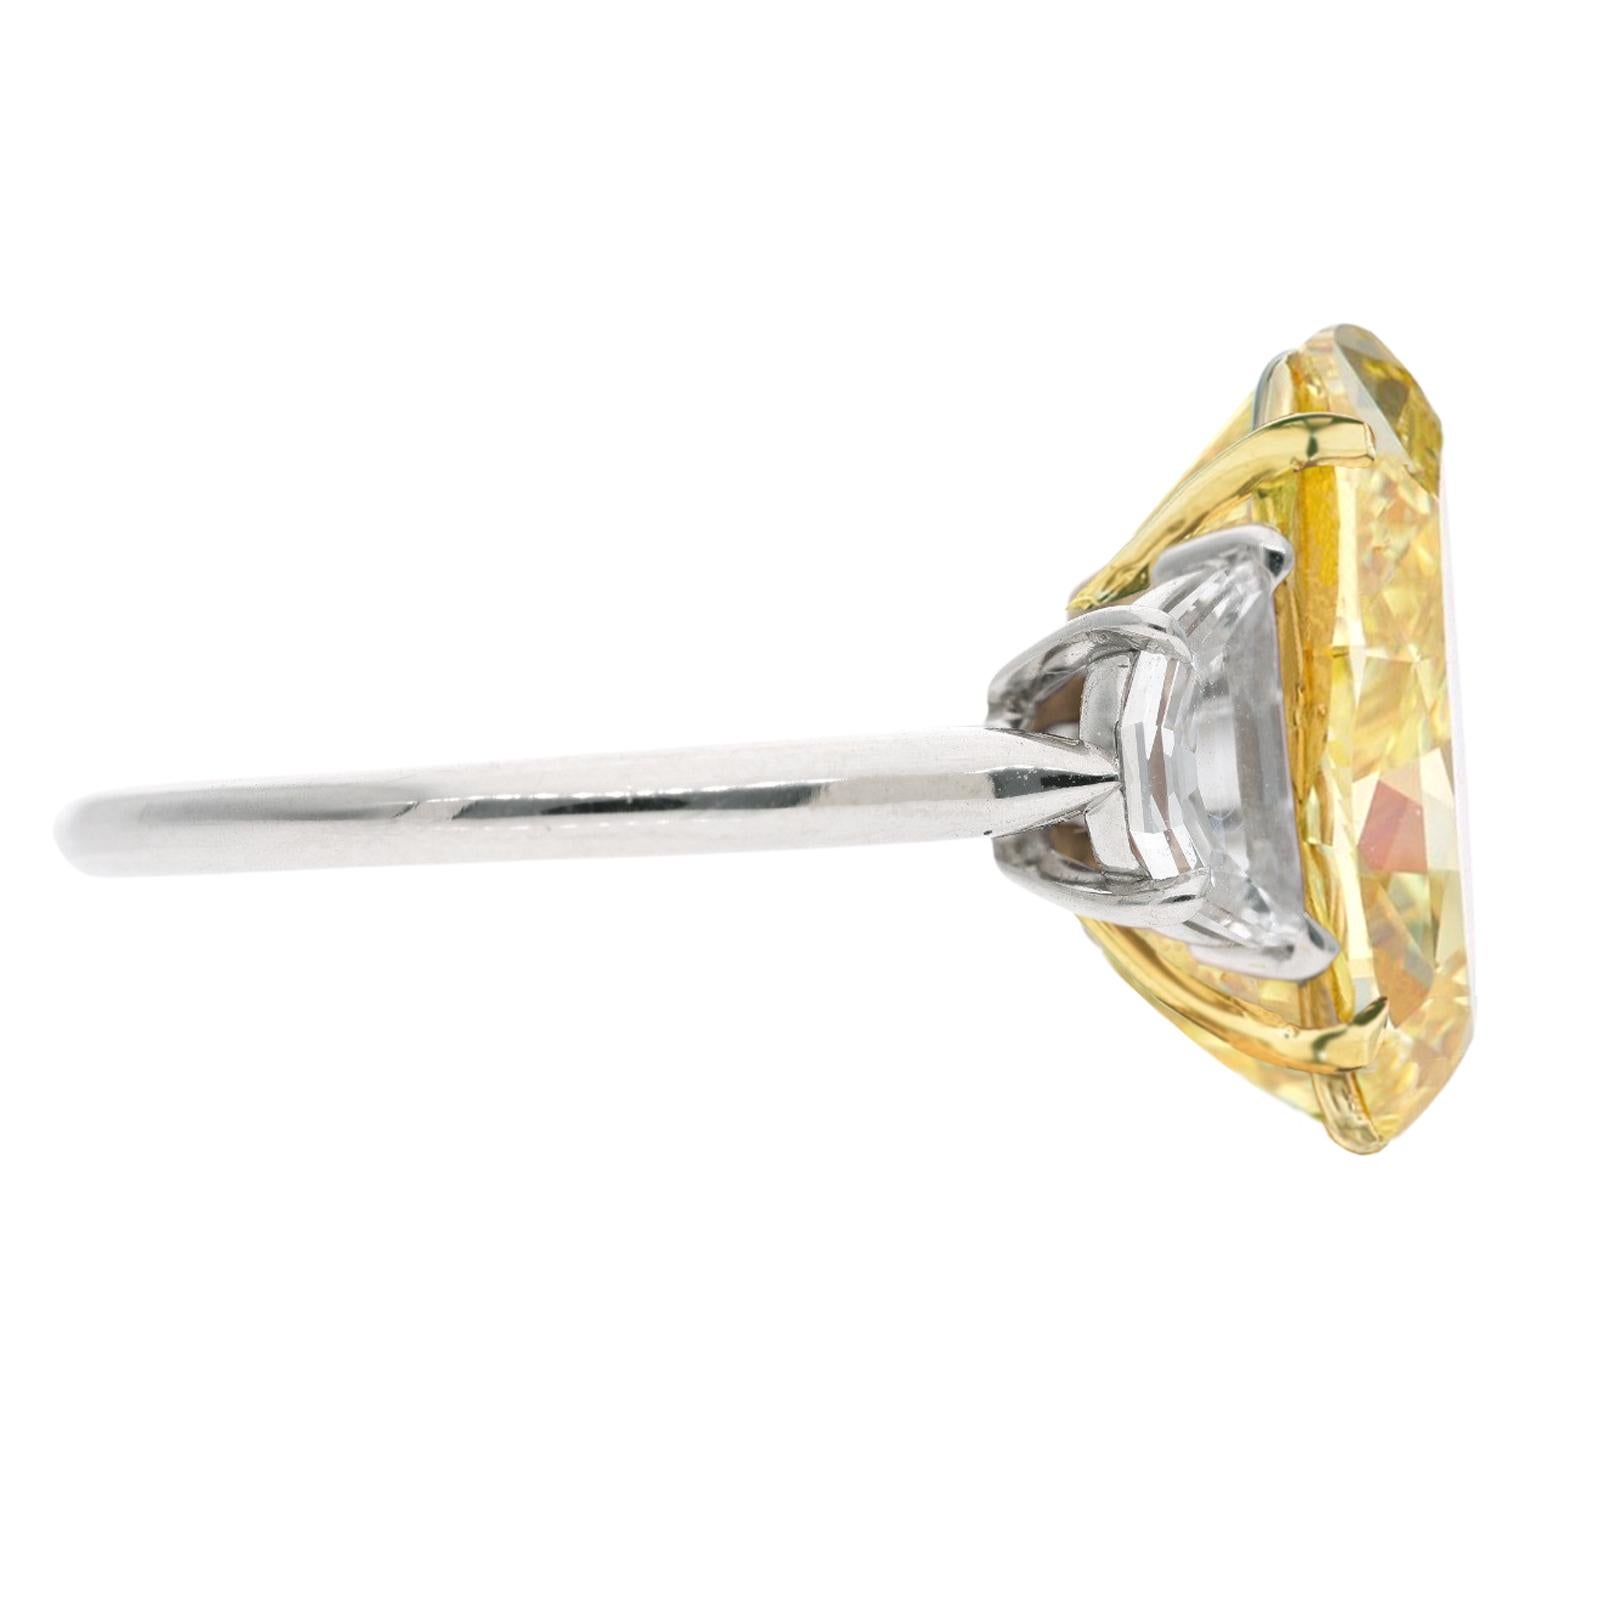 An exquisite GIA certified 5.68 carat oval cut diamond ring 

set with two beautiful half moon cut diamonds 

and set in solid platinum and 18 yellow gold

the ring is resizable

